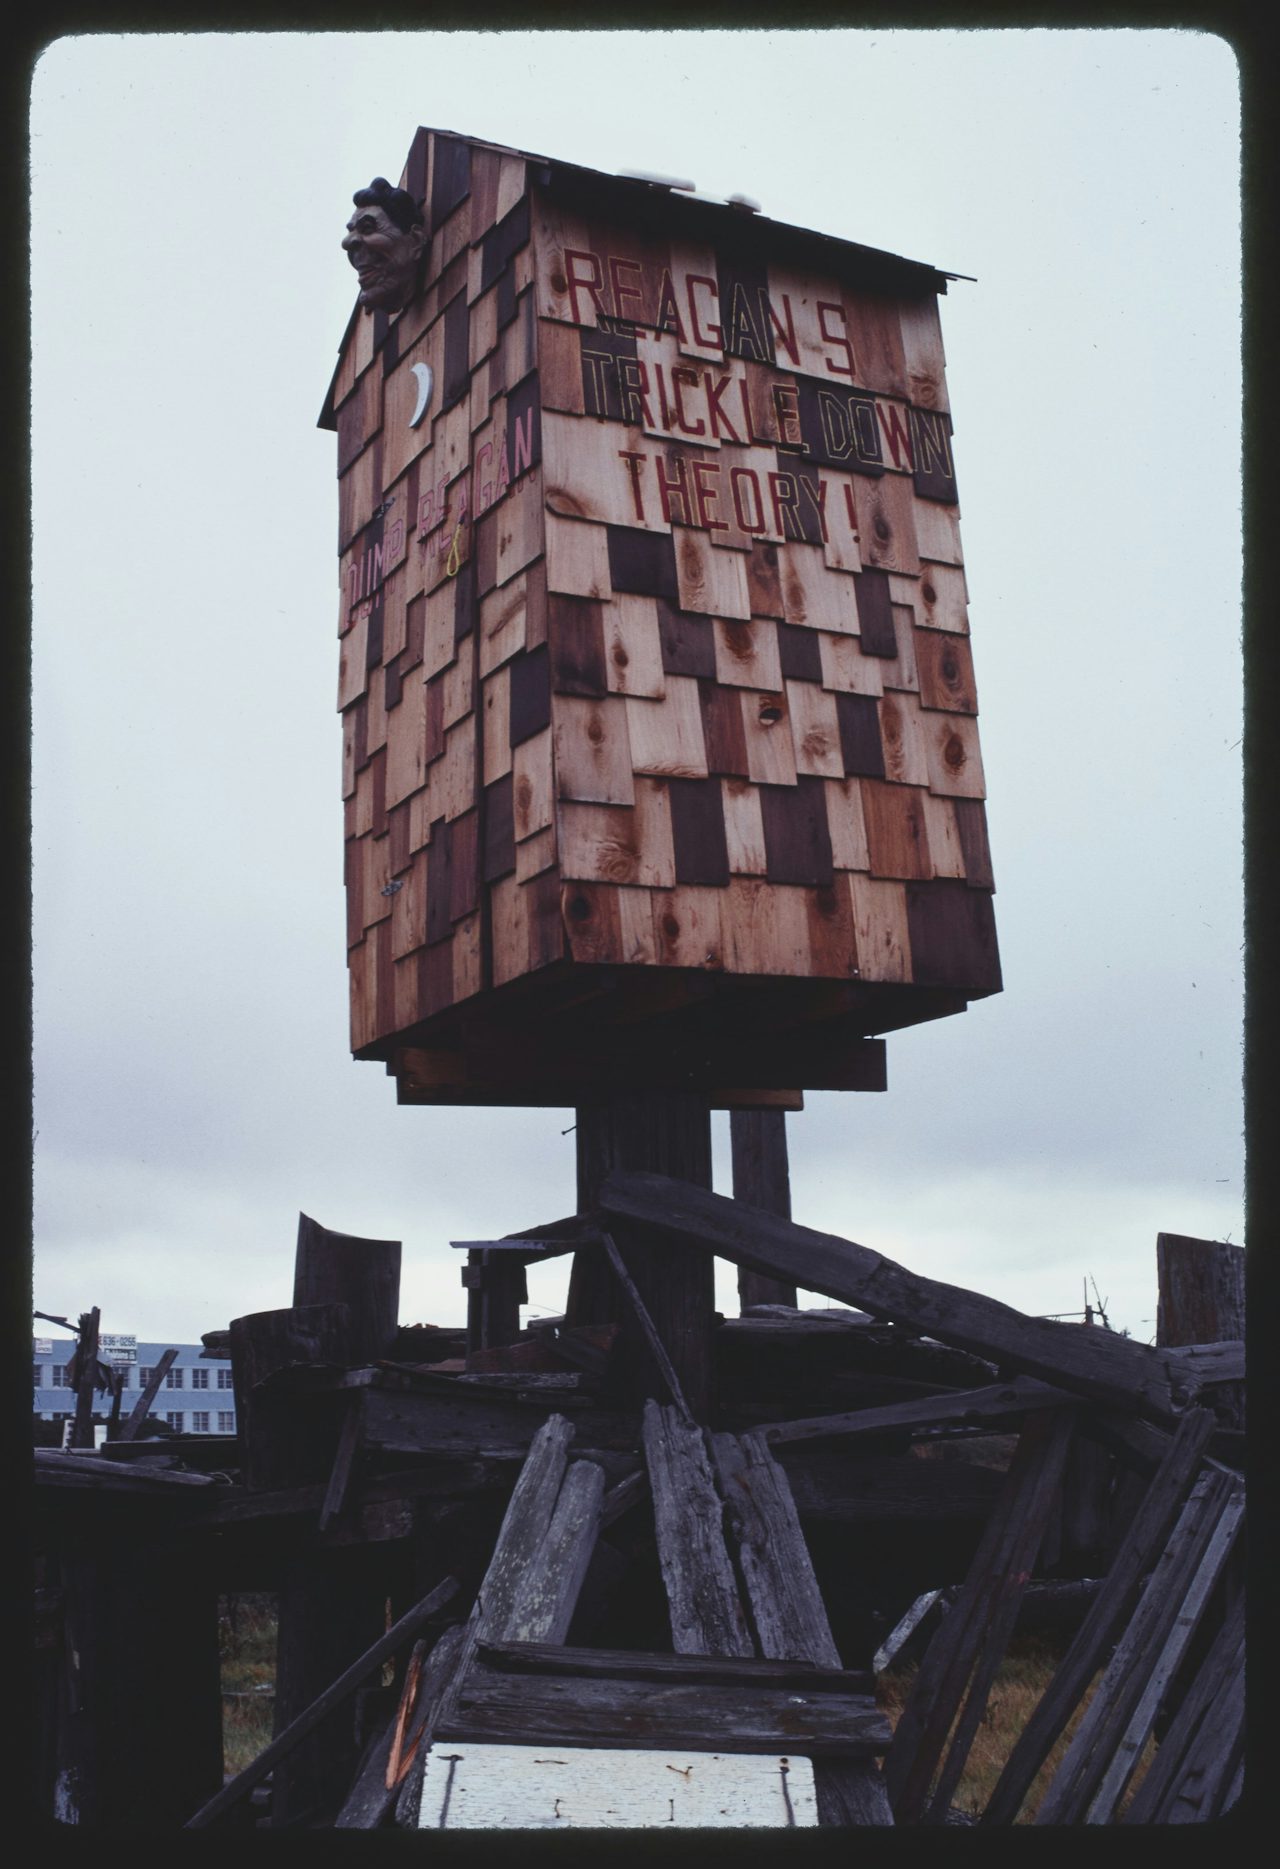 A suspended outhouse with 